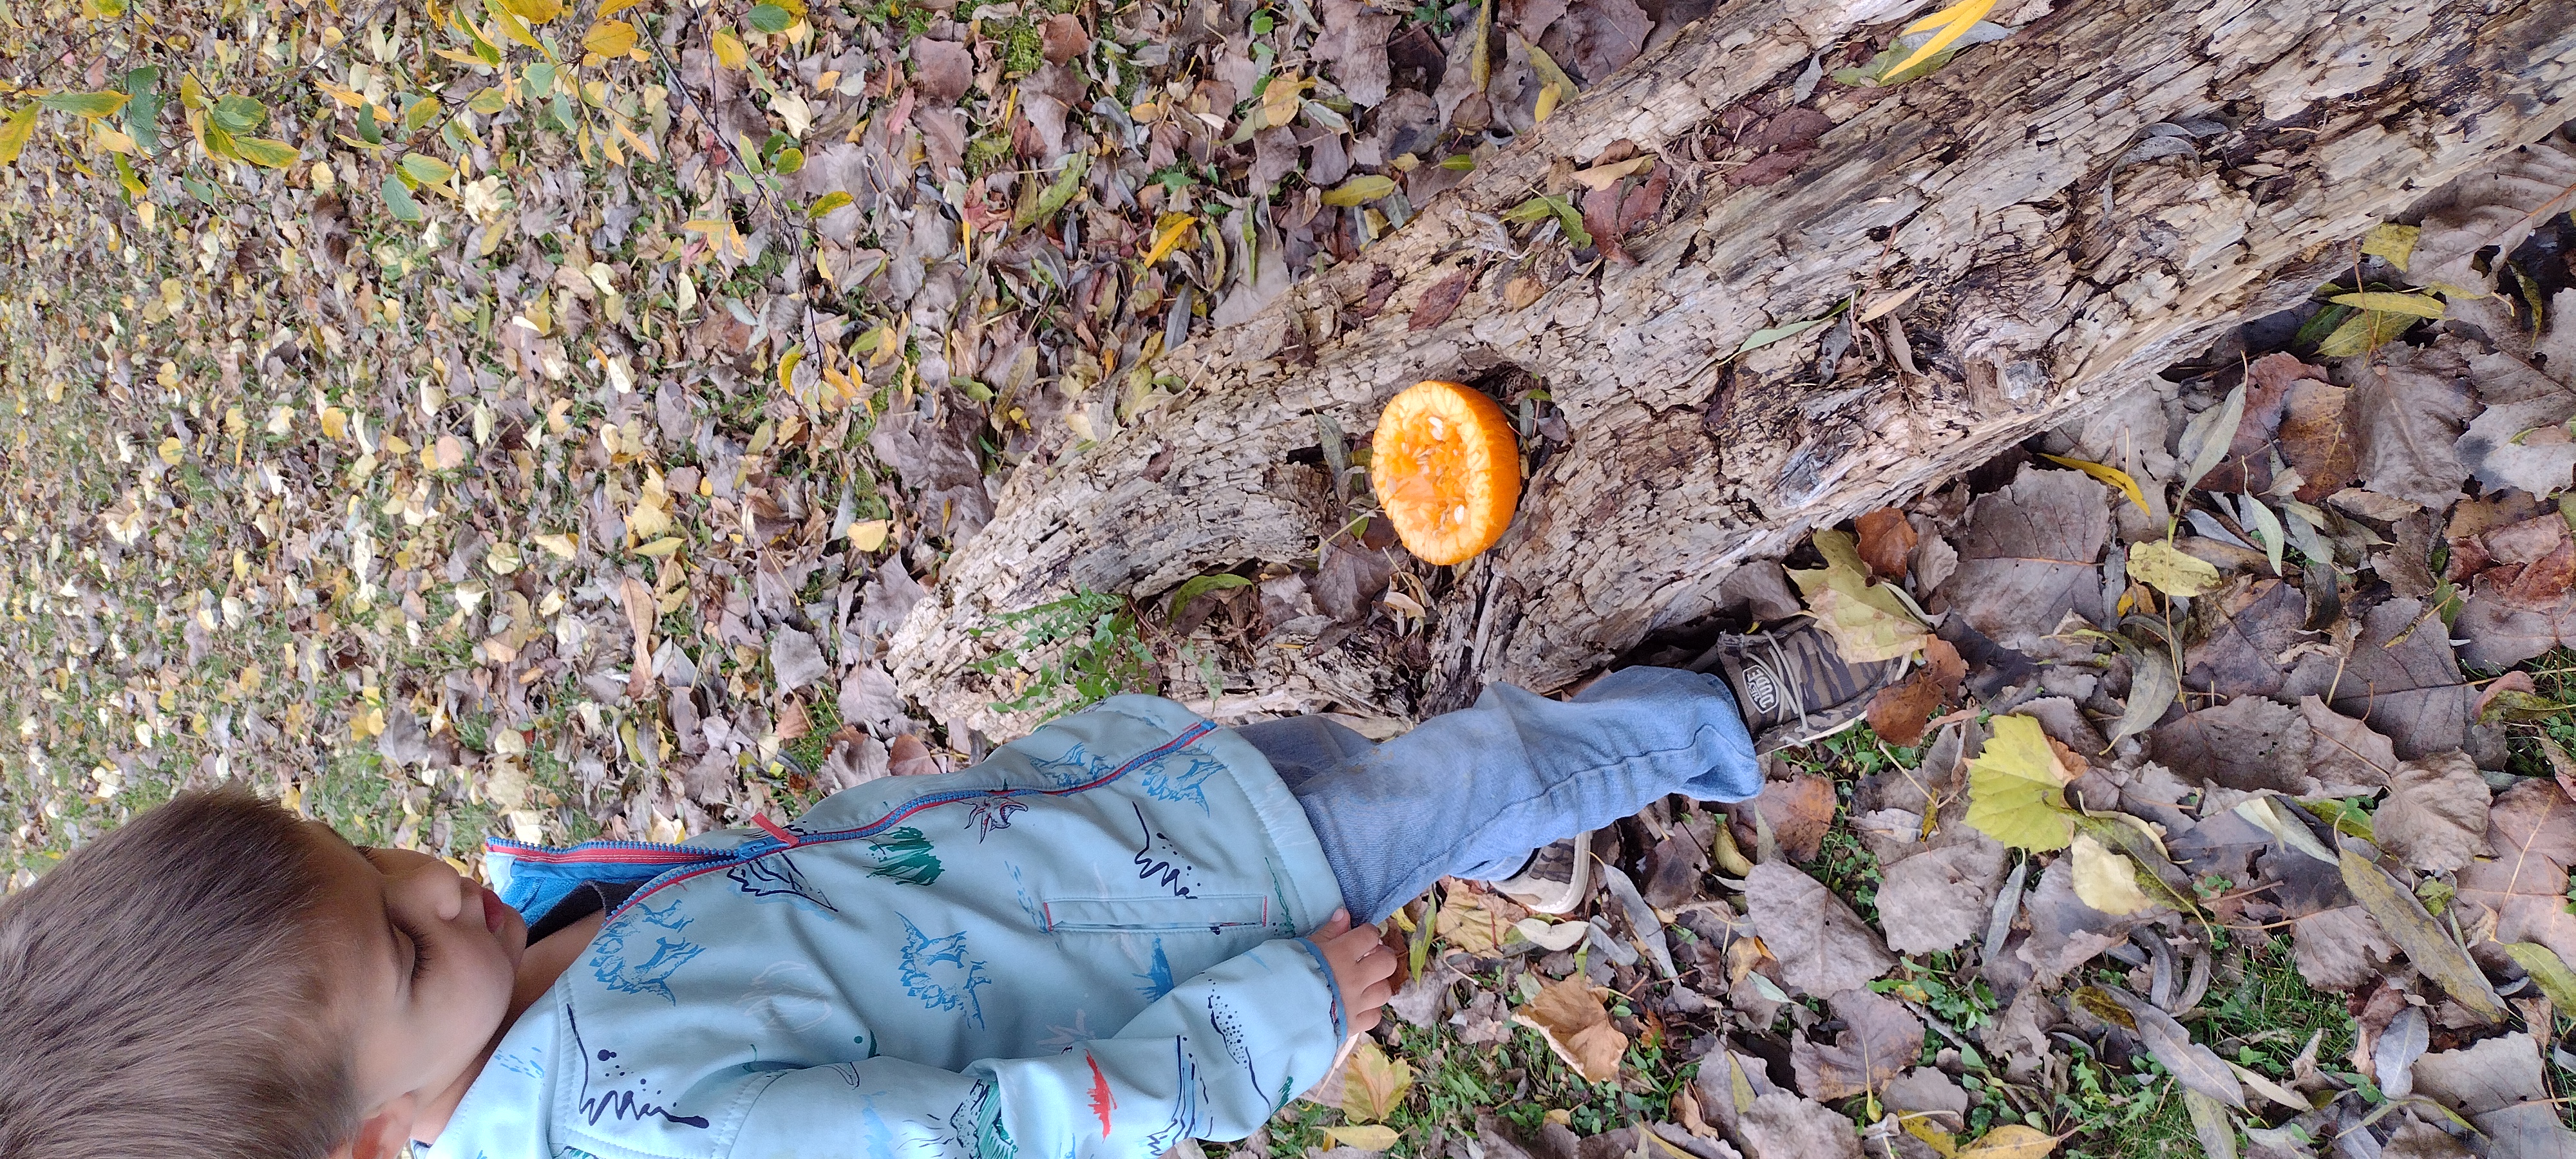 investigating a fallen tree trunk and leaving pumpkins for the animals to eat